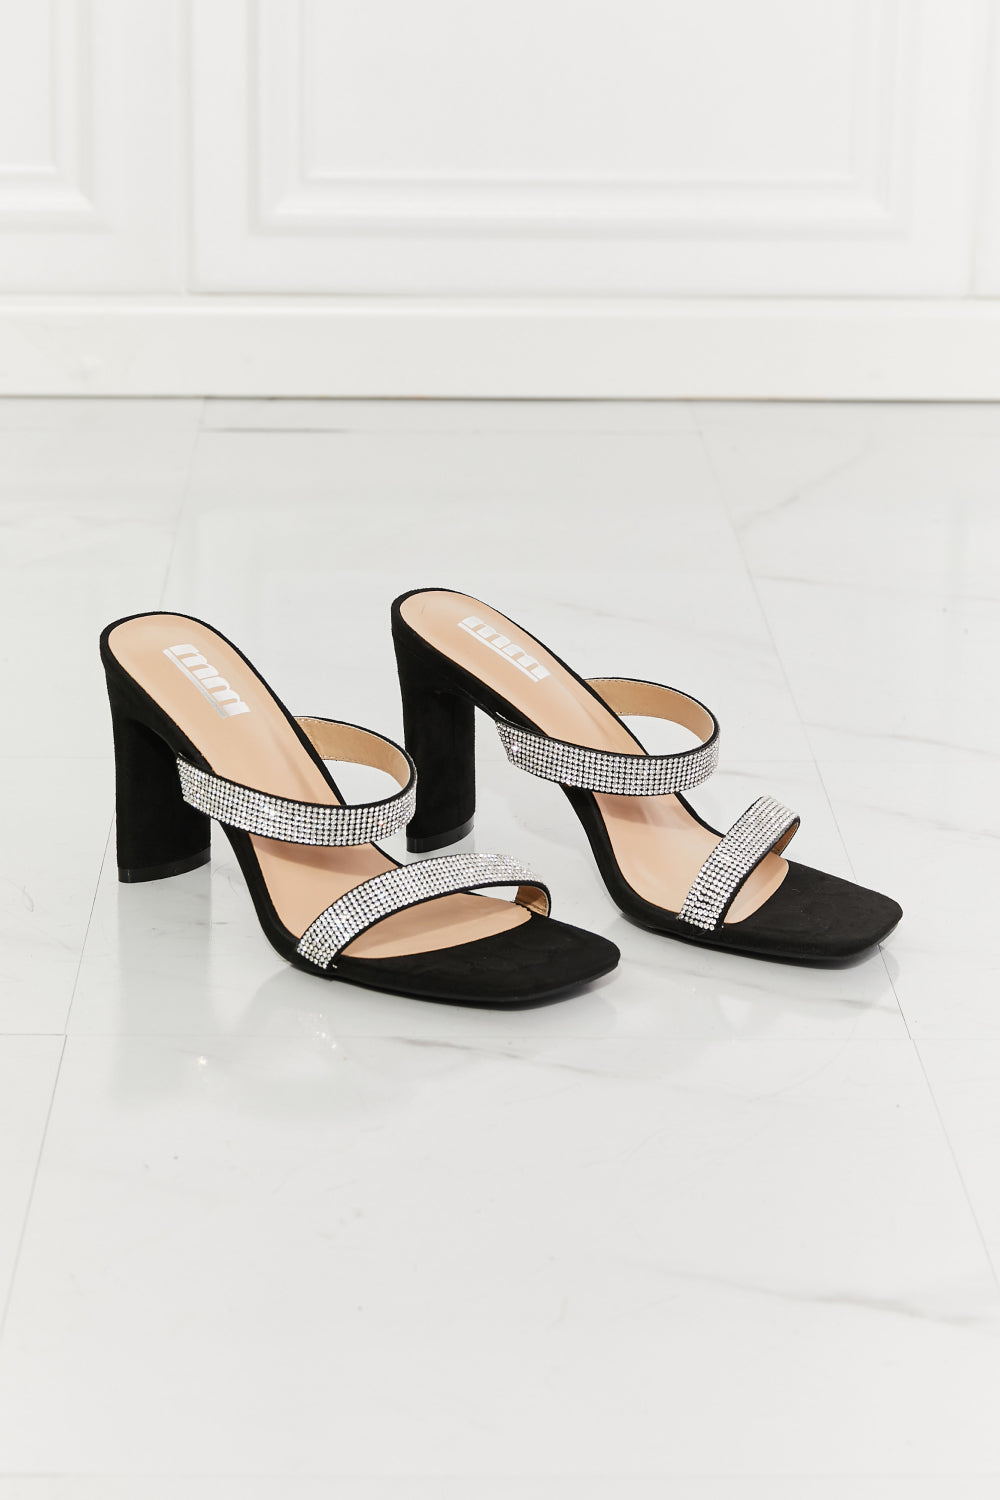 MMShoes Leave A Little Sparkle Rhinestone Block Heel Sandal in Black Print on any thing USA/STOD clothes